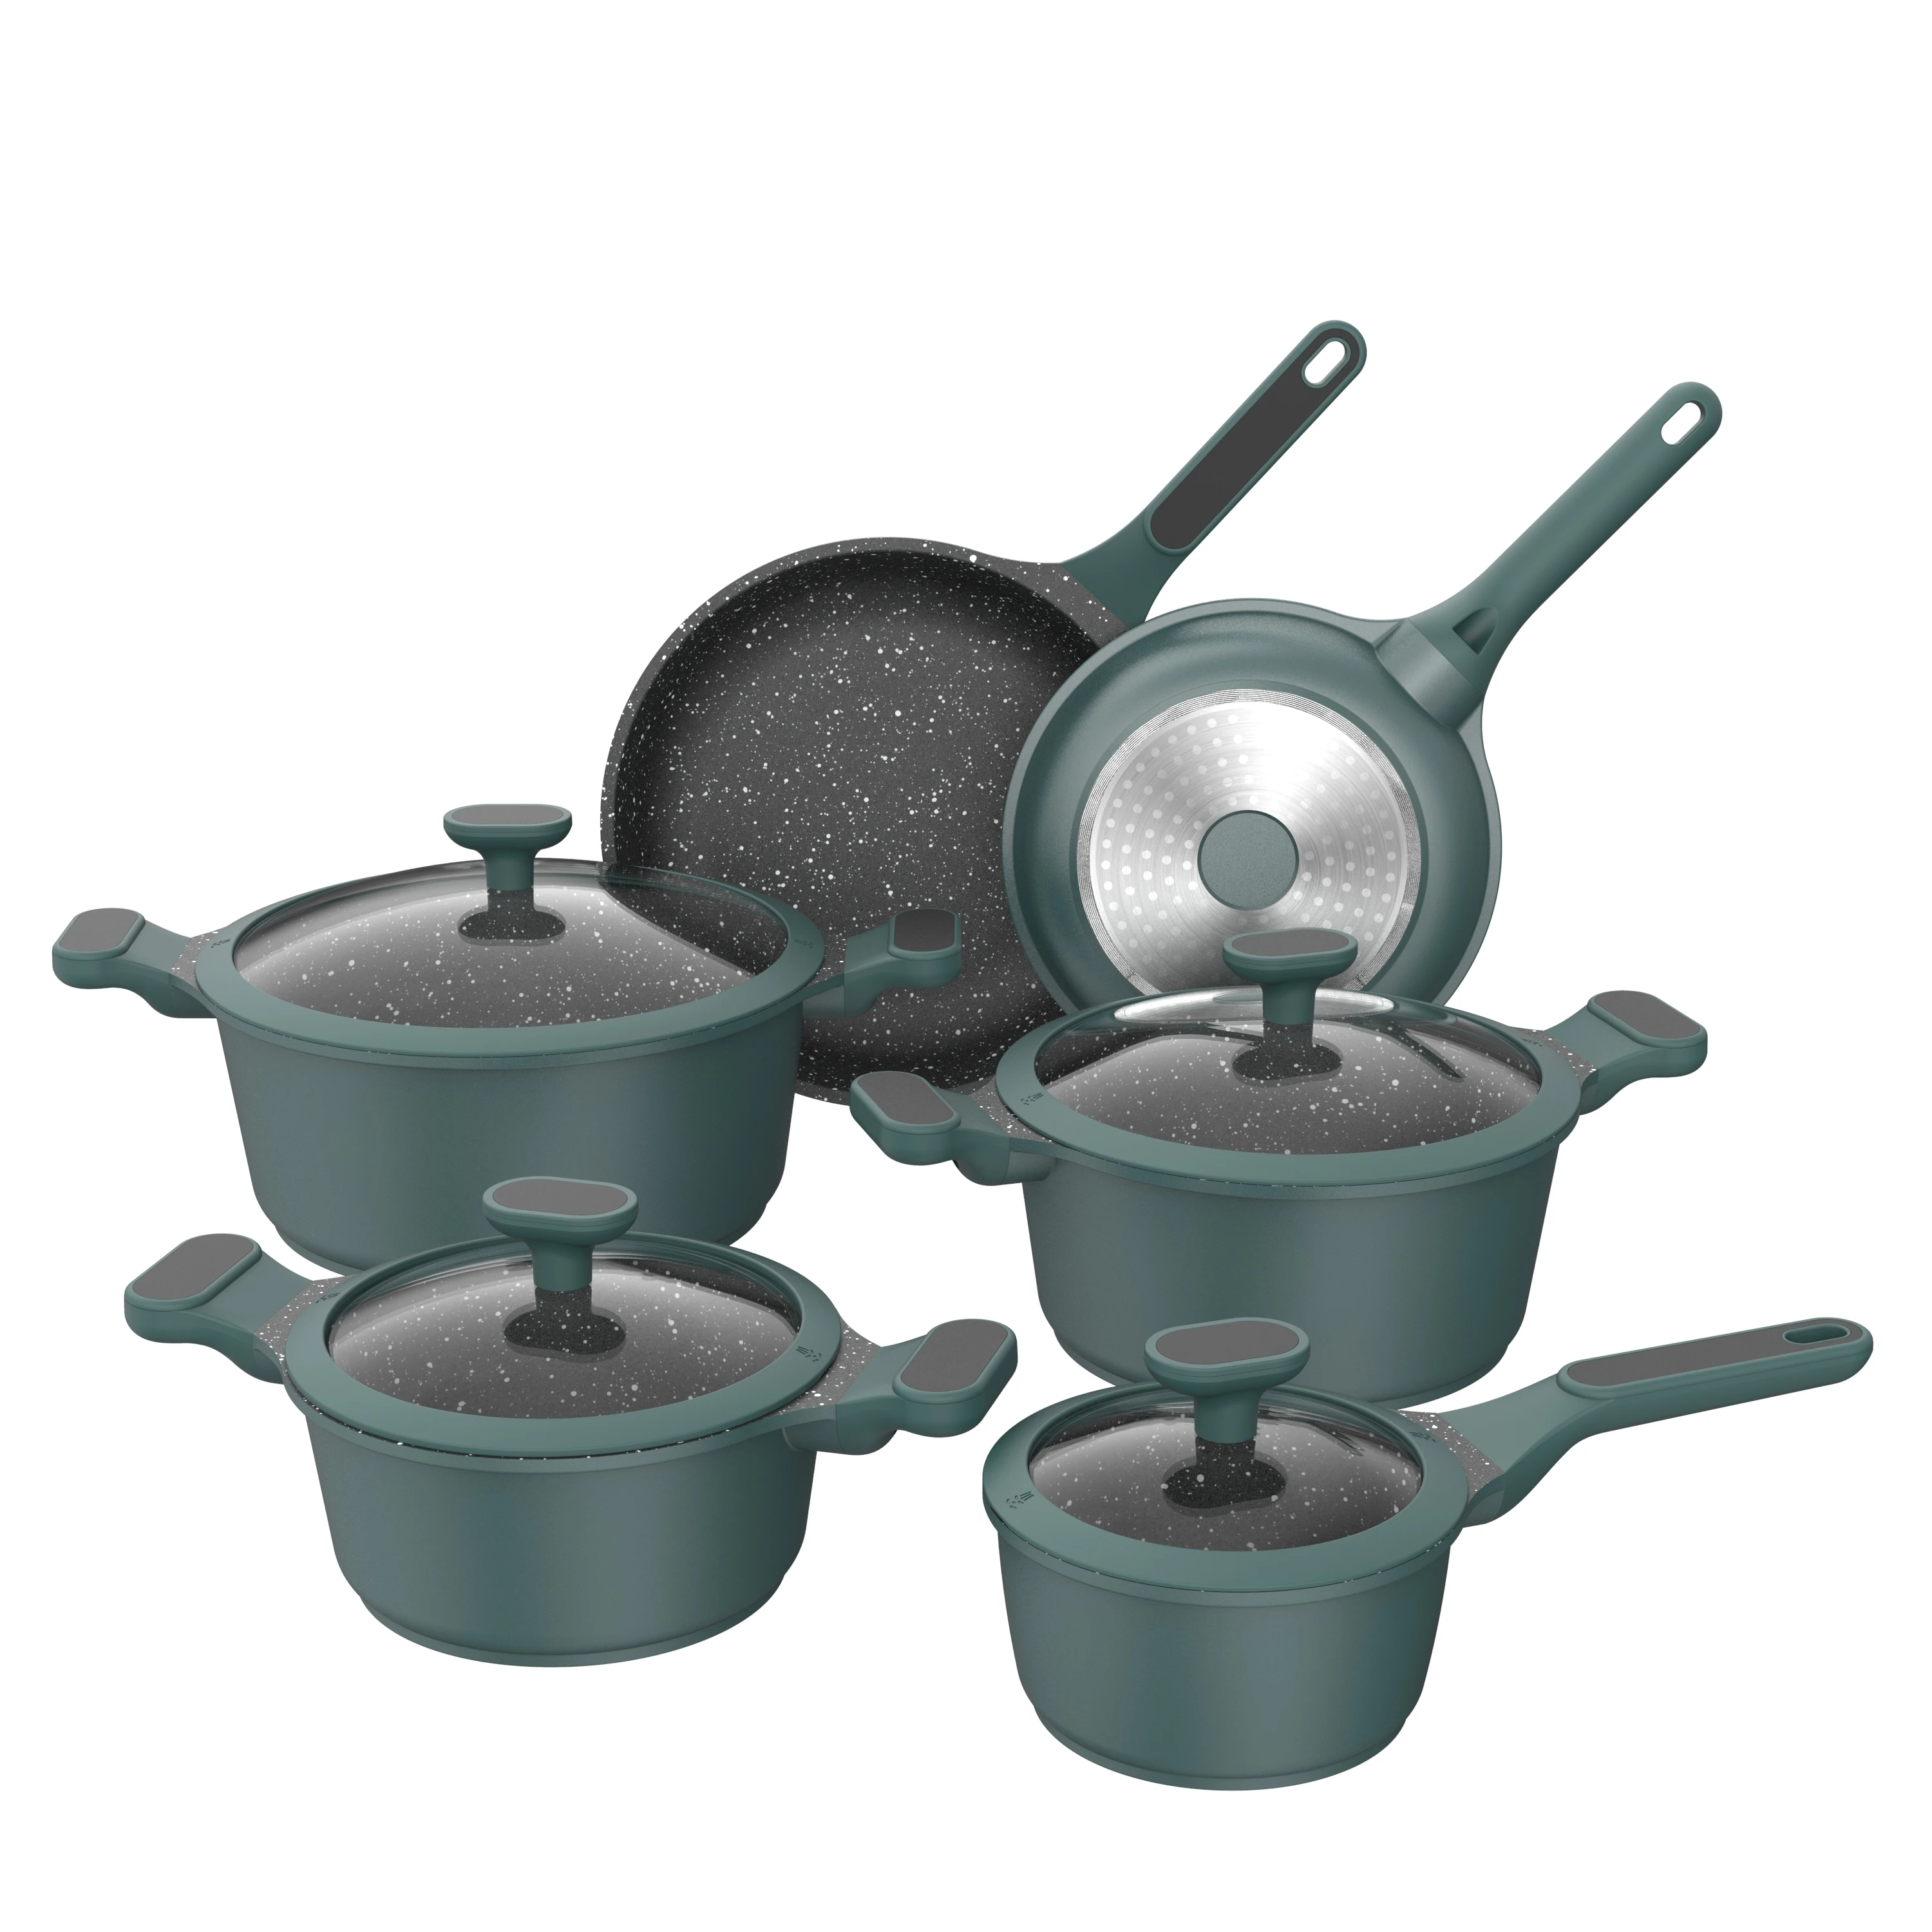 

BESCO Escalation series Cast aluminium set of pots and pans with non-stick coating Bottom with engraved logo pot set non stick